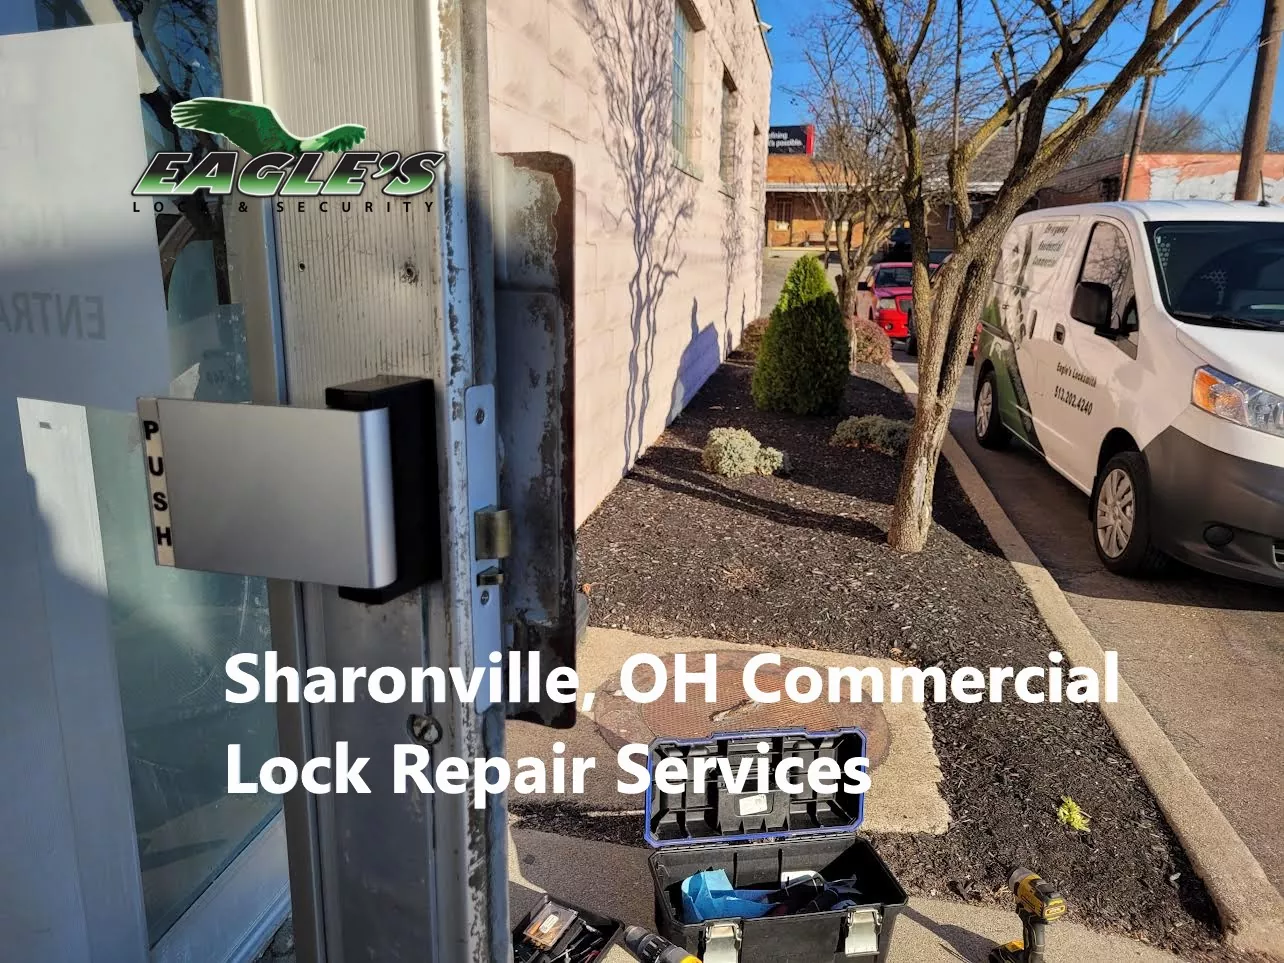 Sharonville, OH Commercial Lock Repair Services